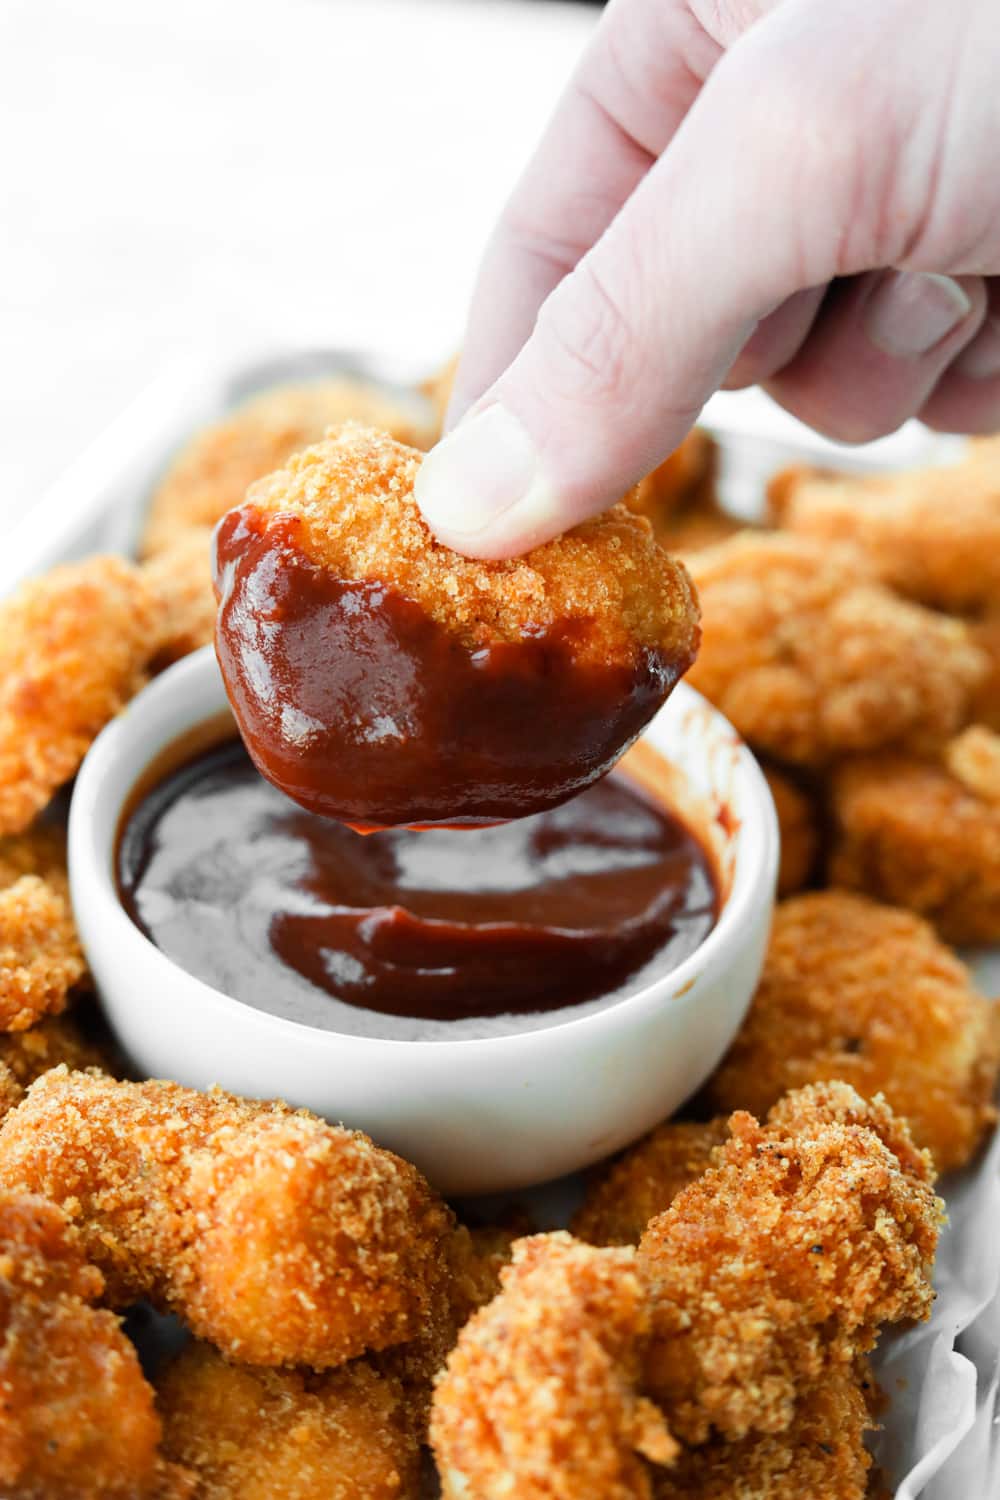 A hand holding a chicken nugget that's been dipped in barbecue sauce.